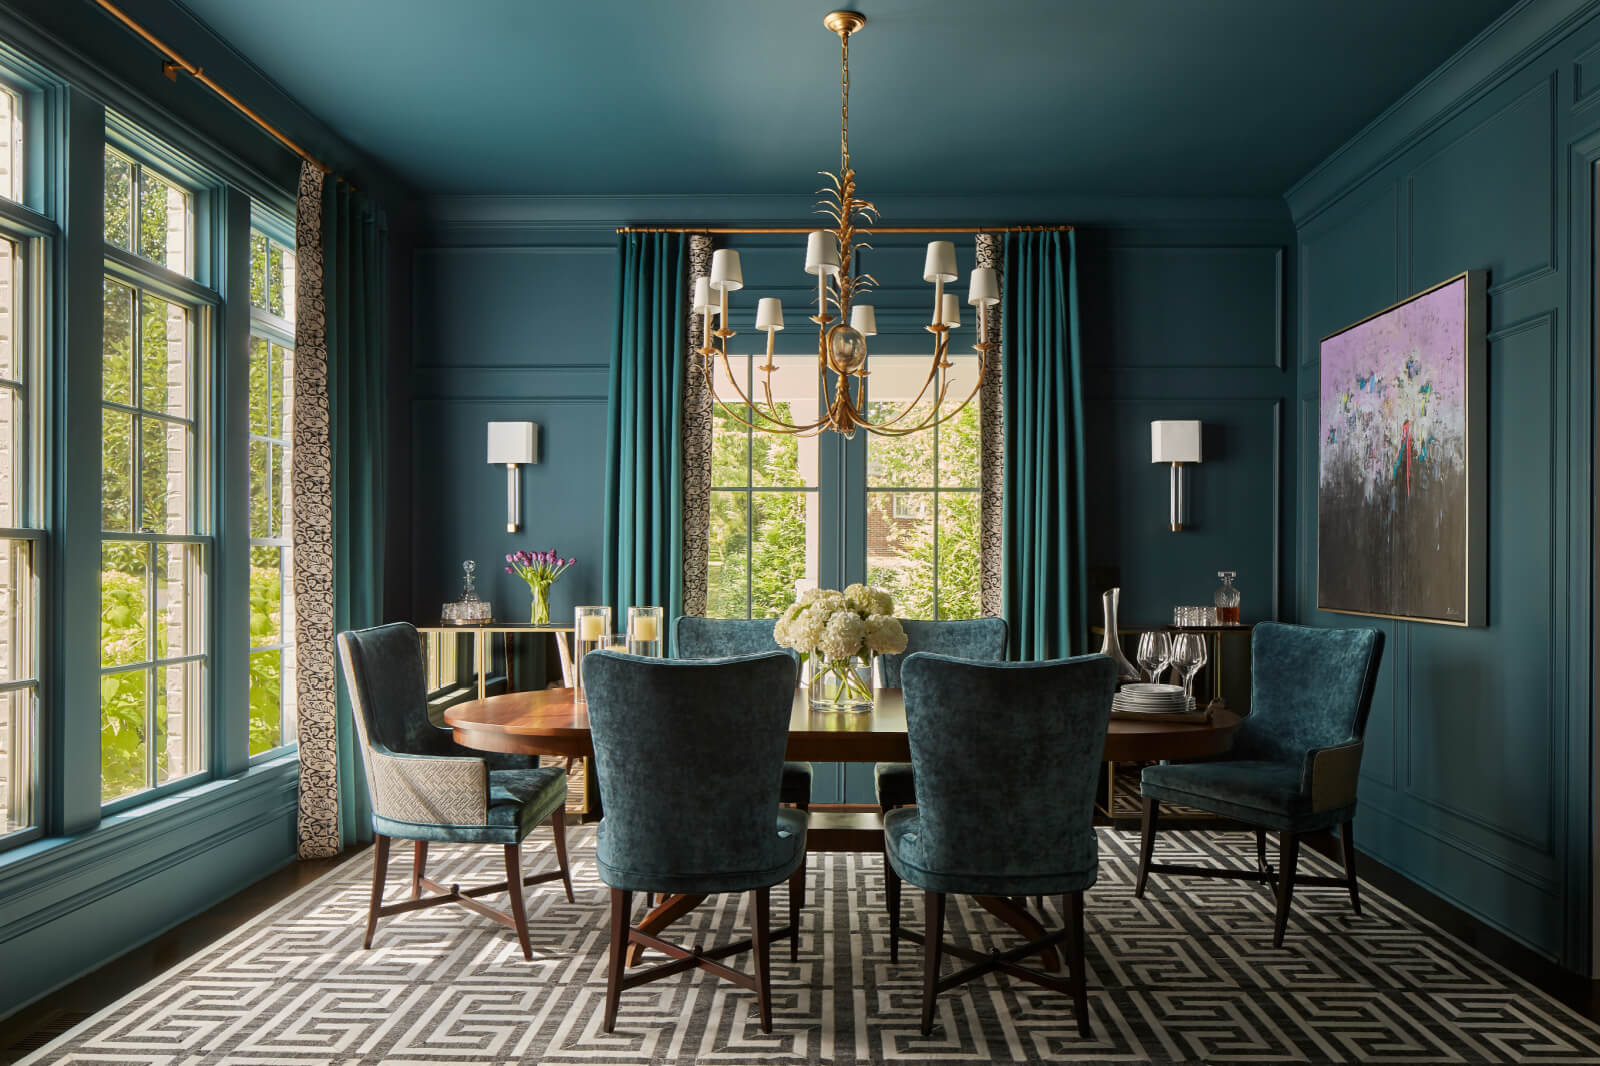 Interior Designer Brad Ramsey: Southern Charm with a Modern Spin